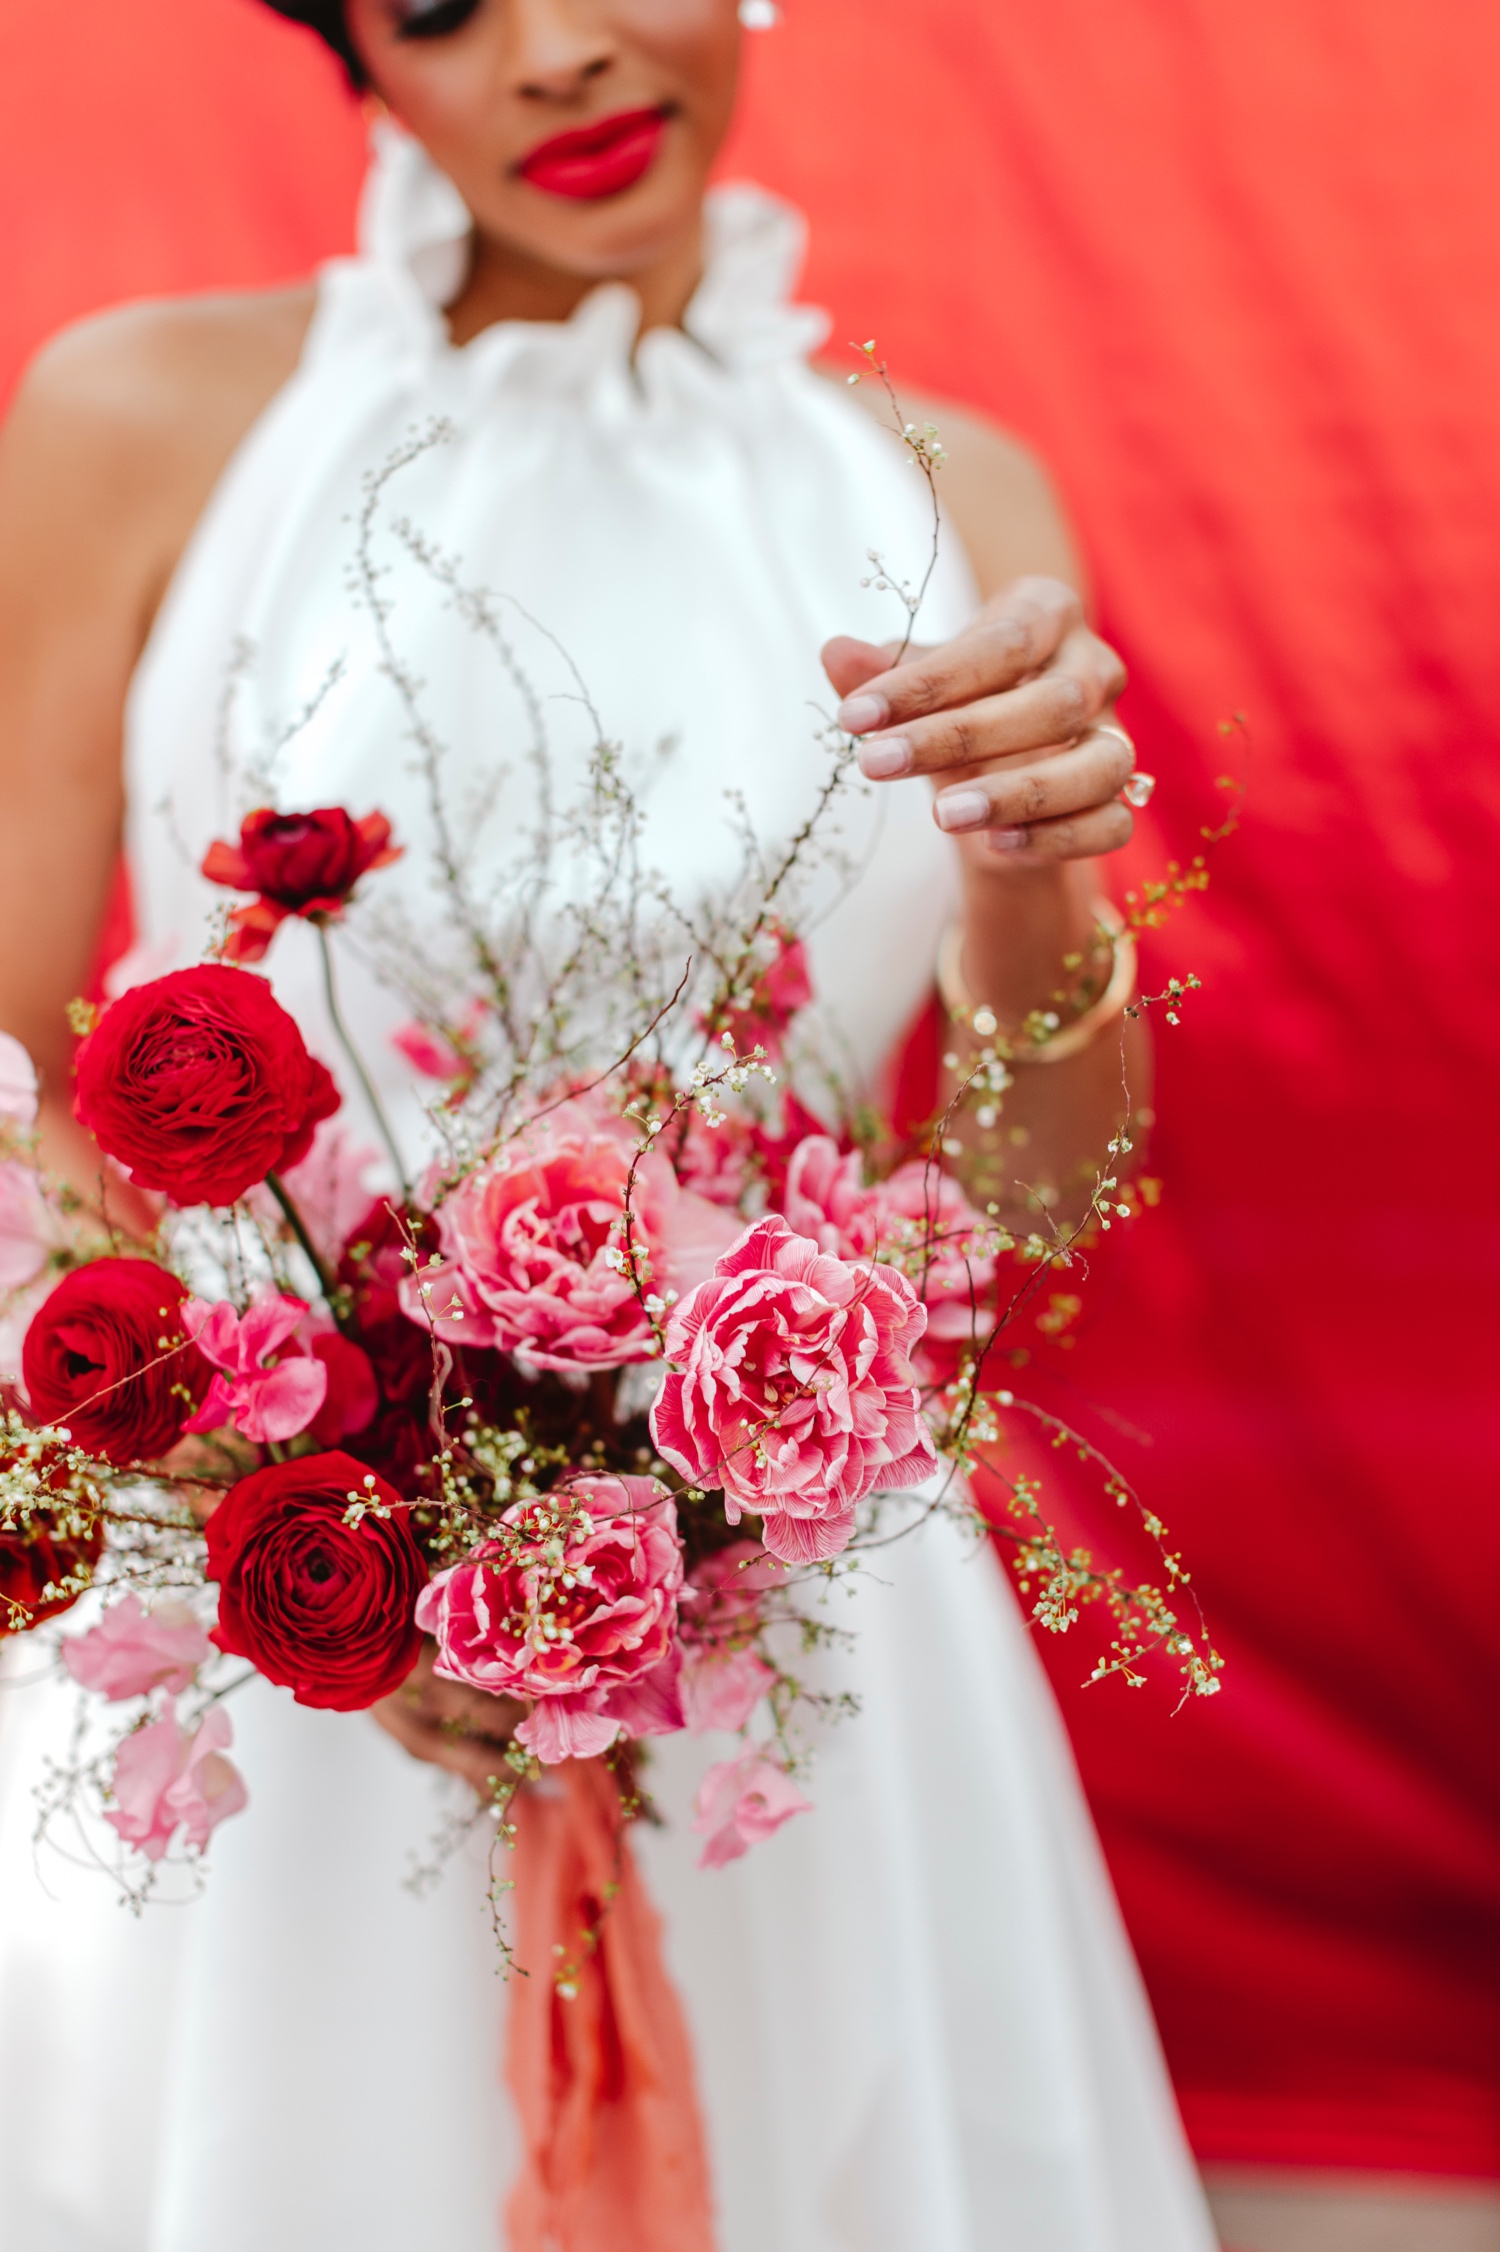 Close-up of a bride holding a bouquet with deep red and pink flowers, with a red backdrop.